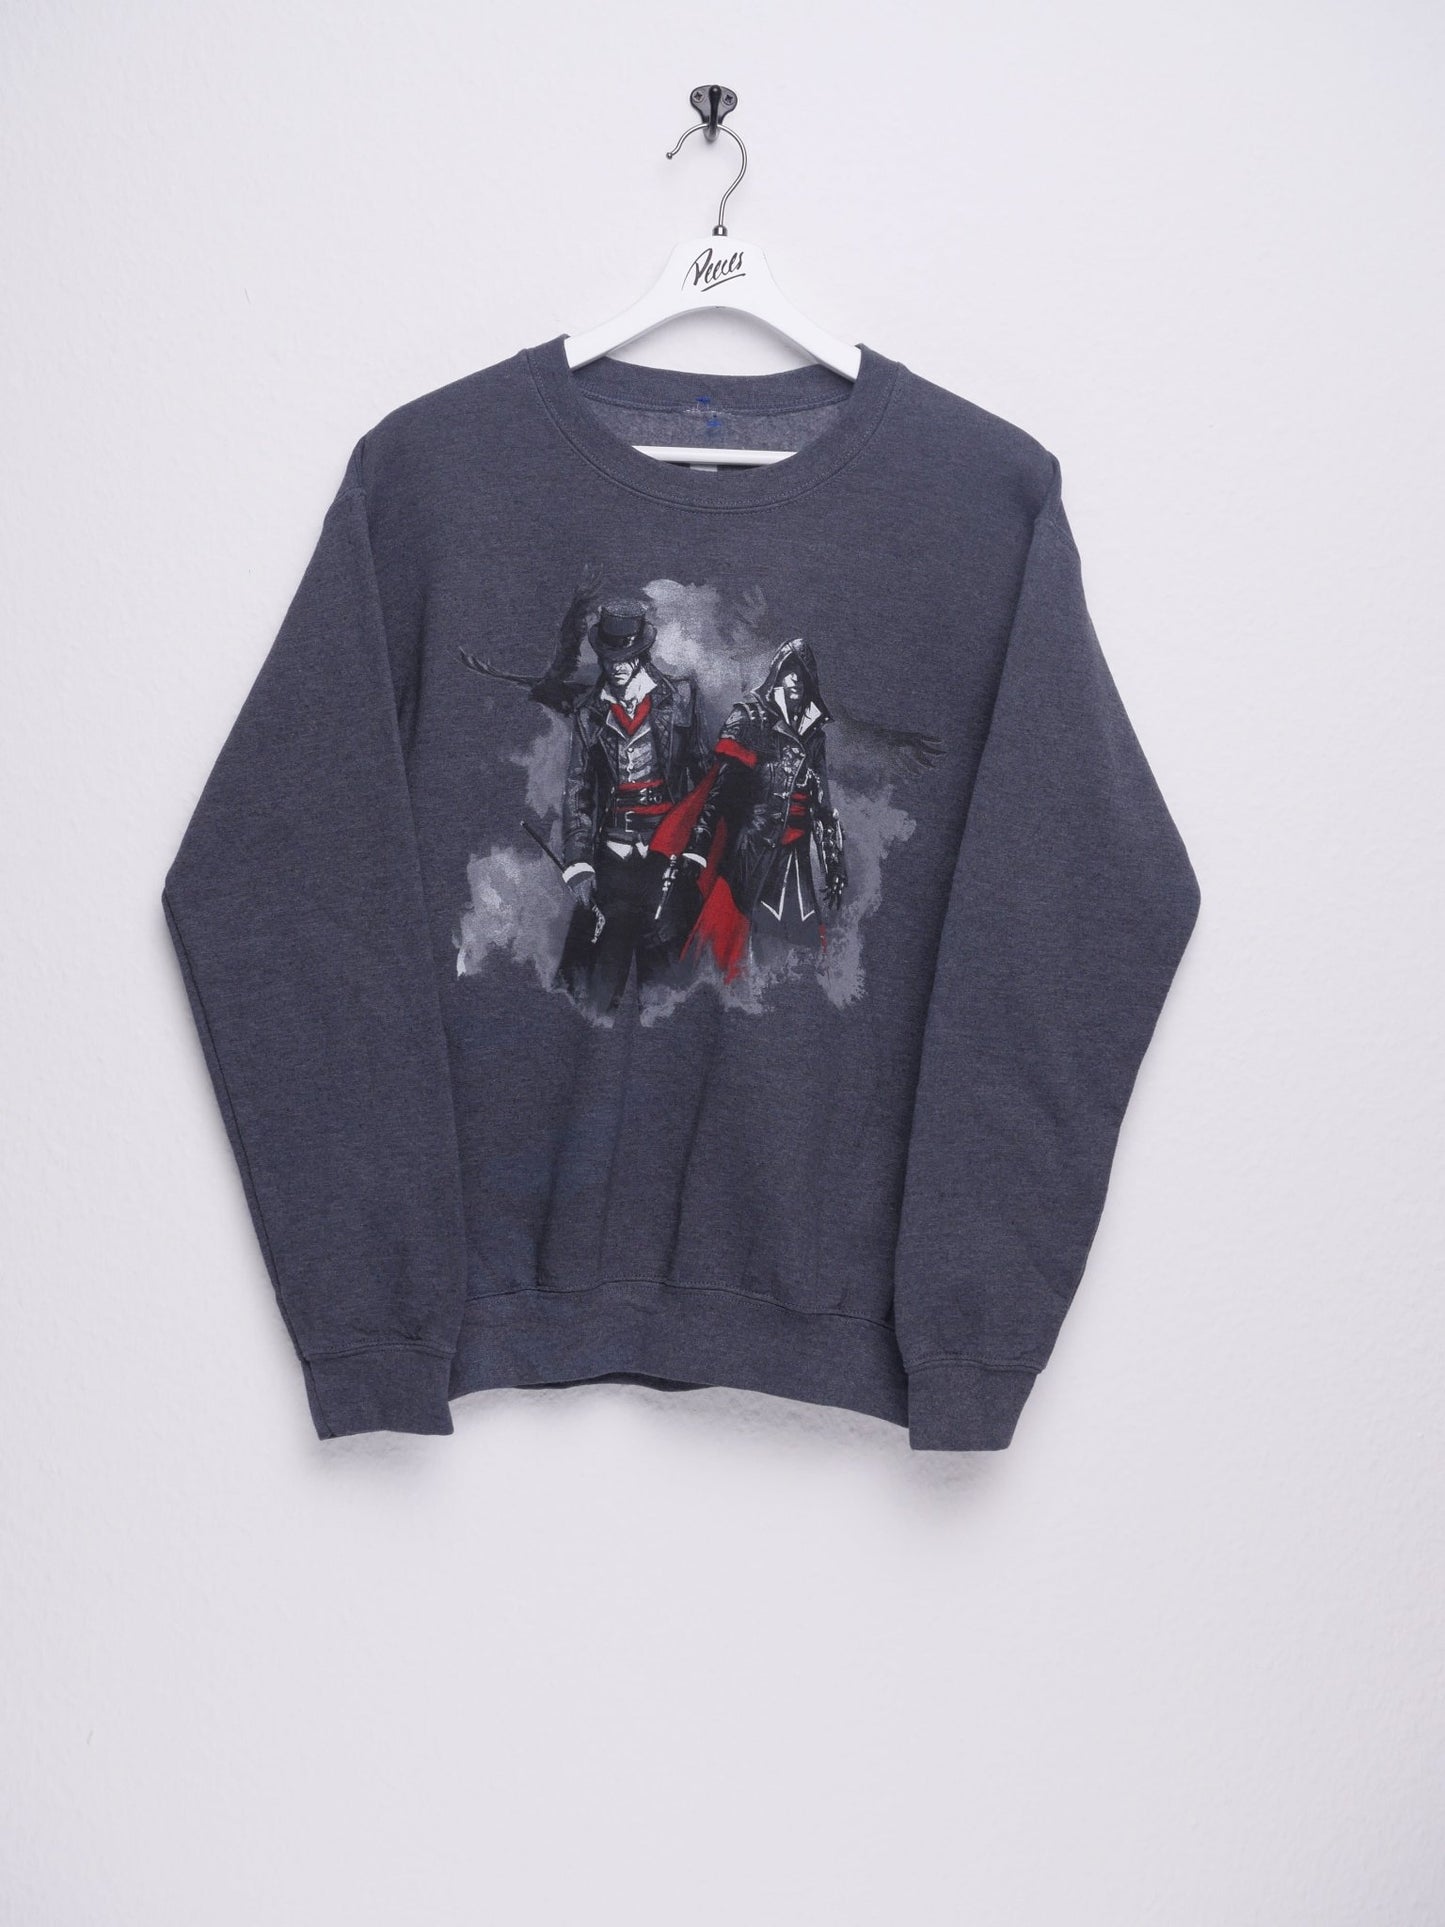 Assassins Creed printed Graphic Sweater - Peeces